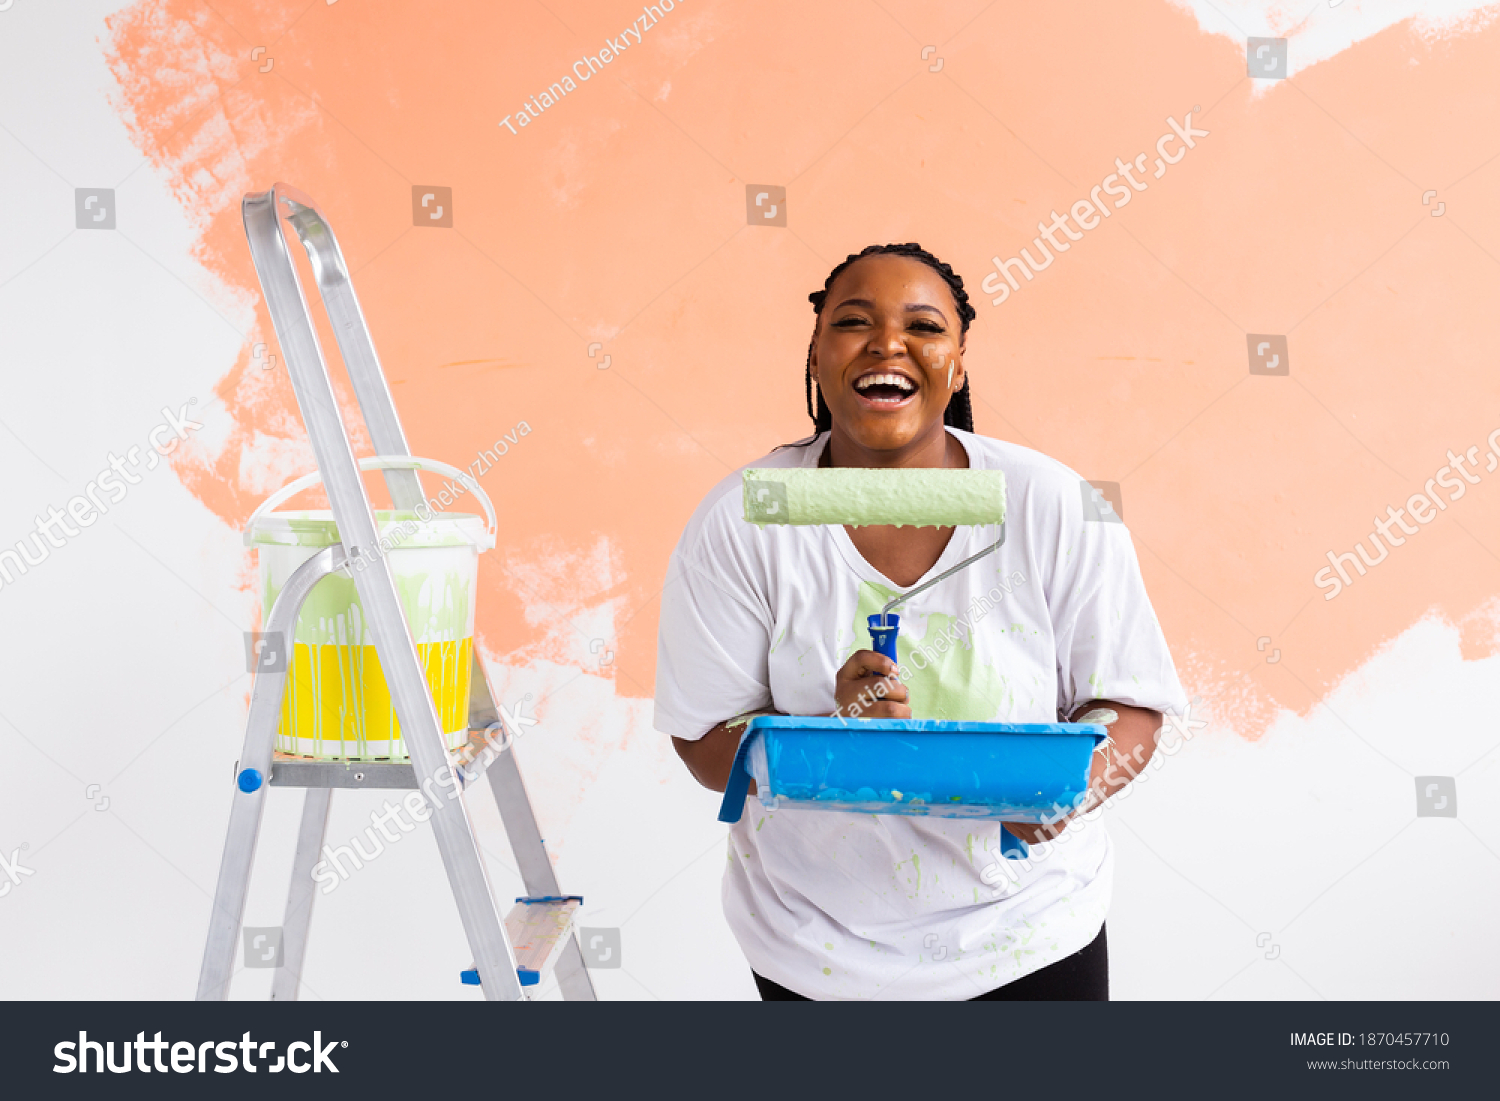 Smiling african american woman painting interior wall of home. Renovation, repair and redecoration concept. #1870457710